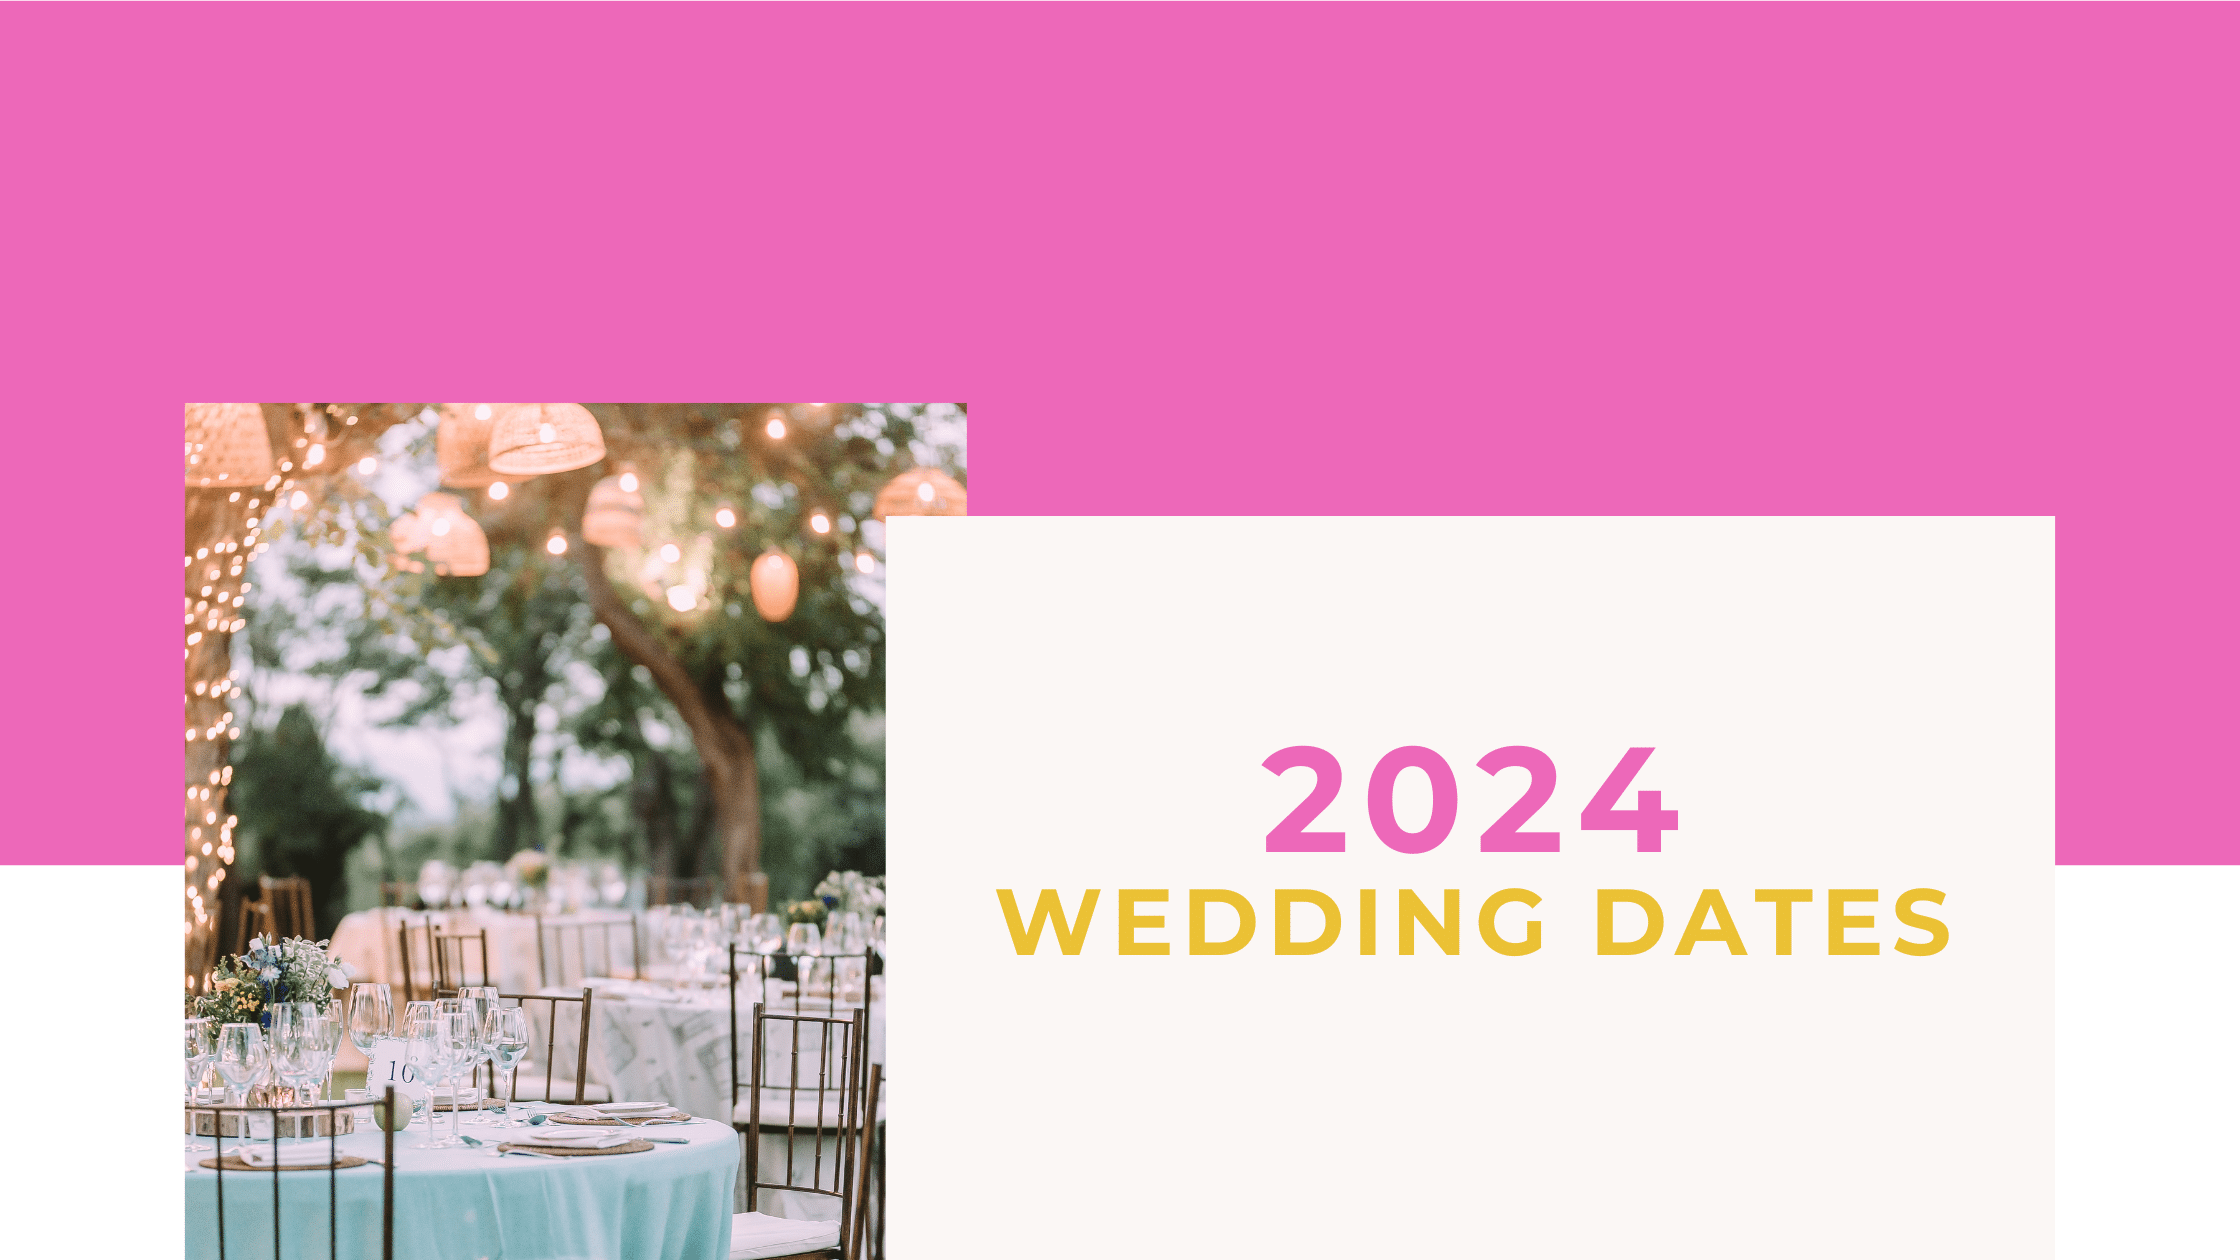 The Best Dates To Get Married in 2024 Newcastle Celebrant